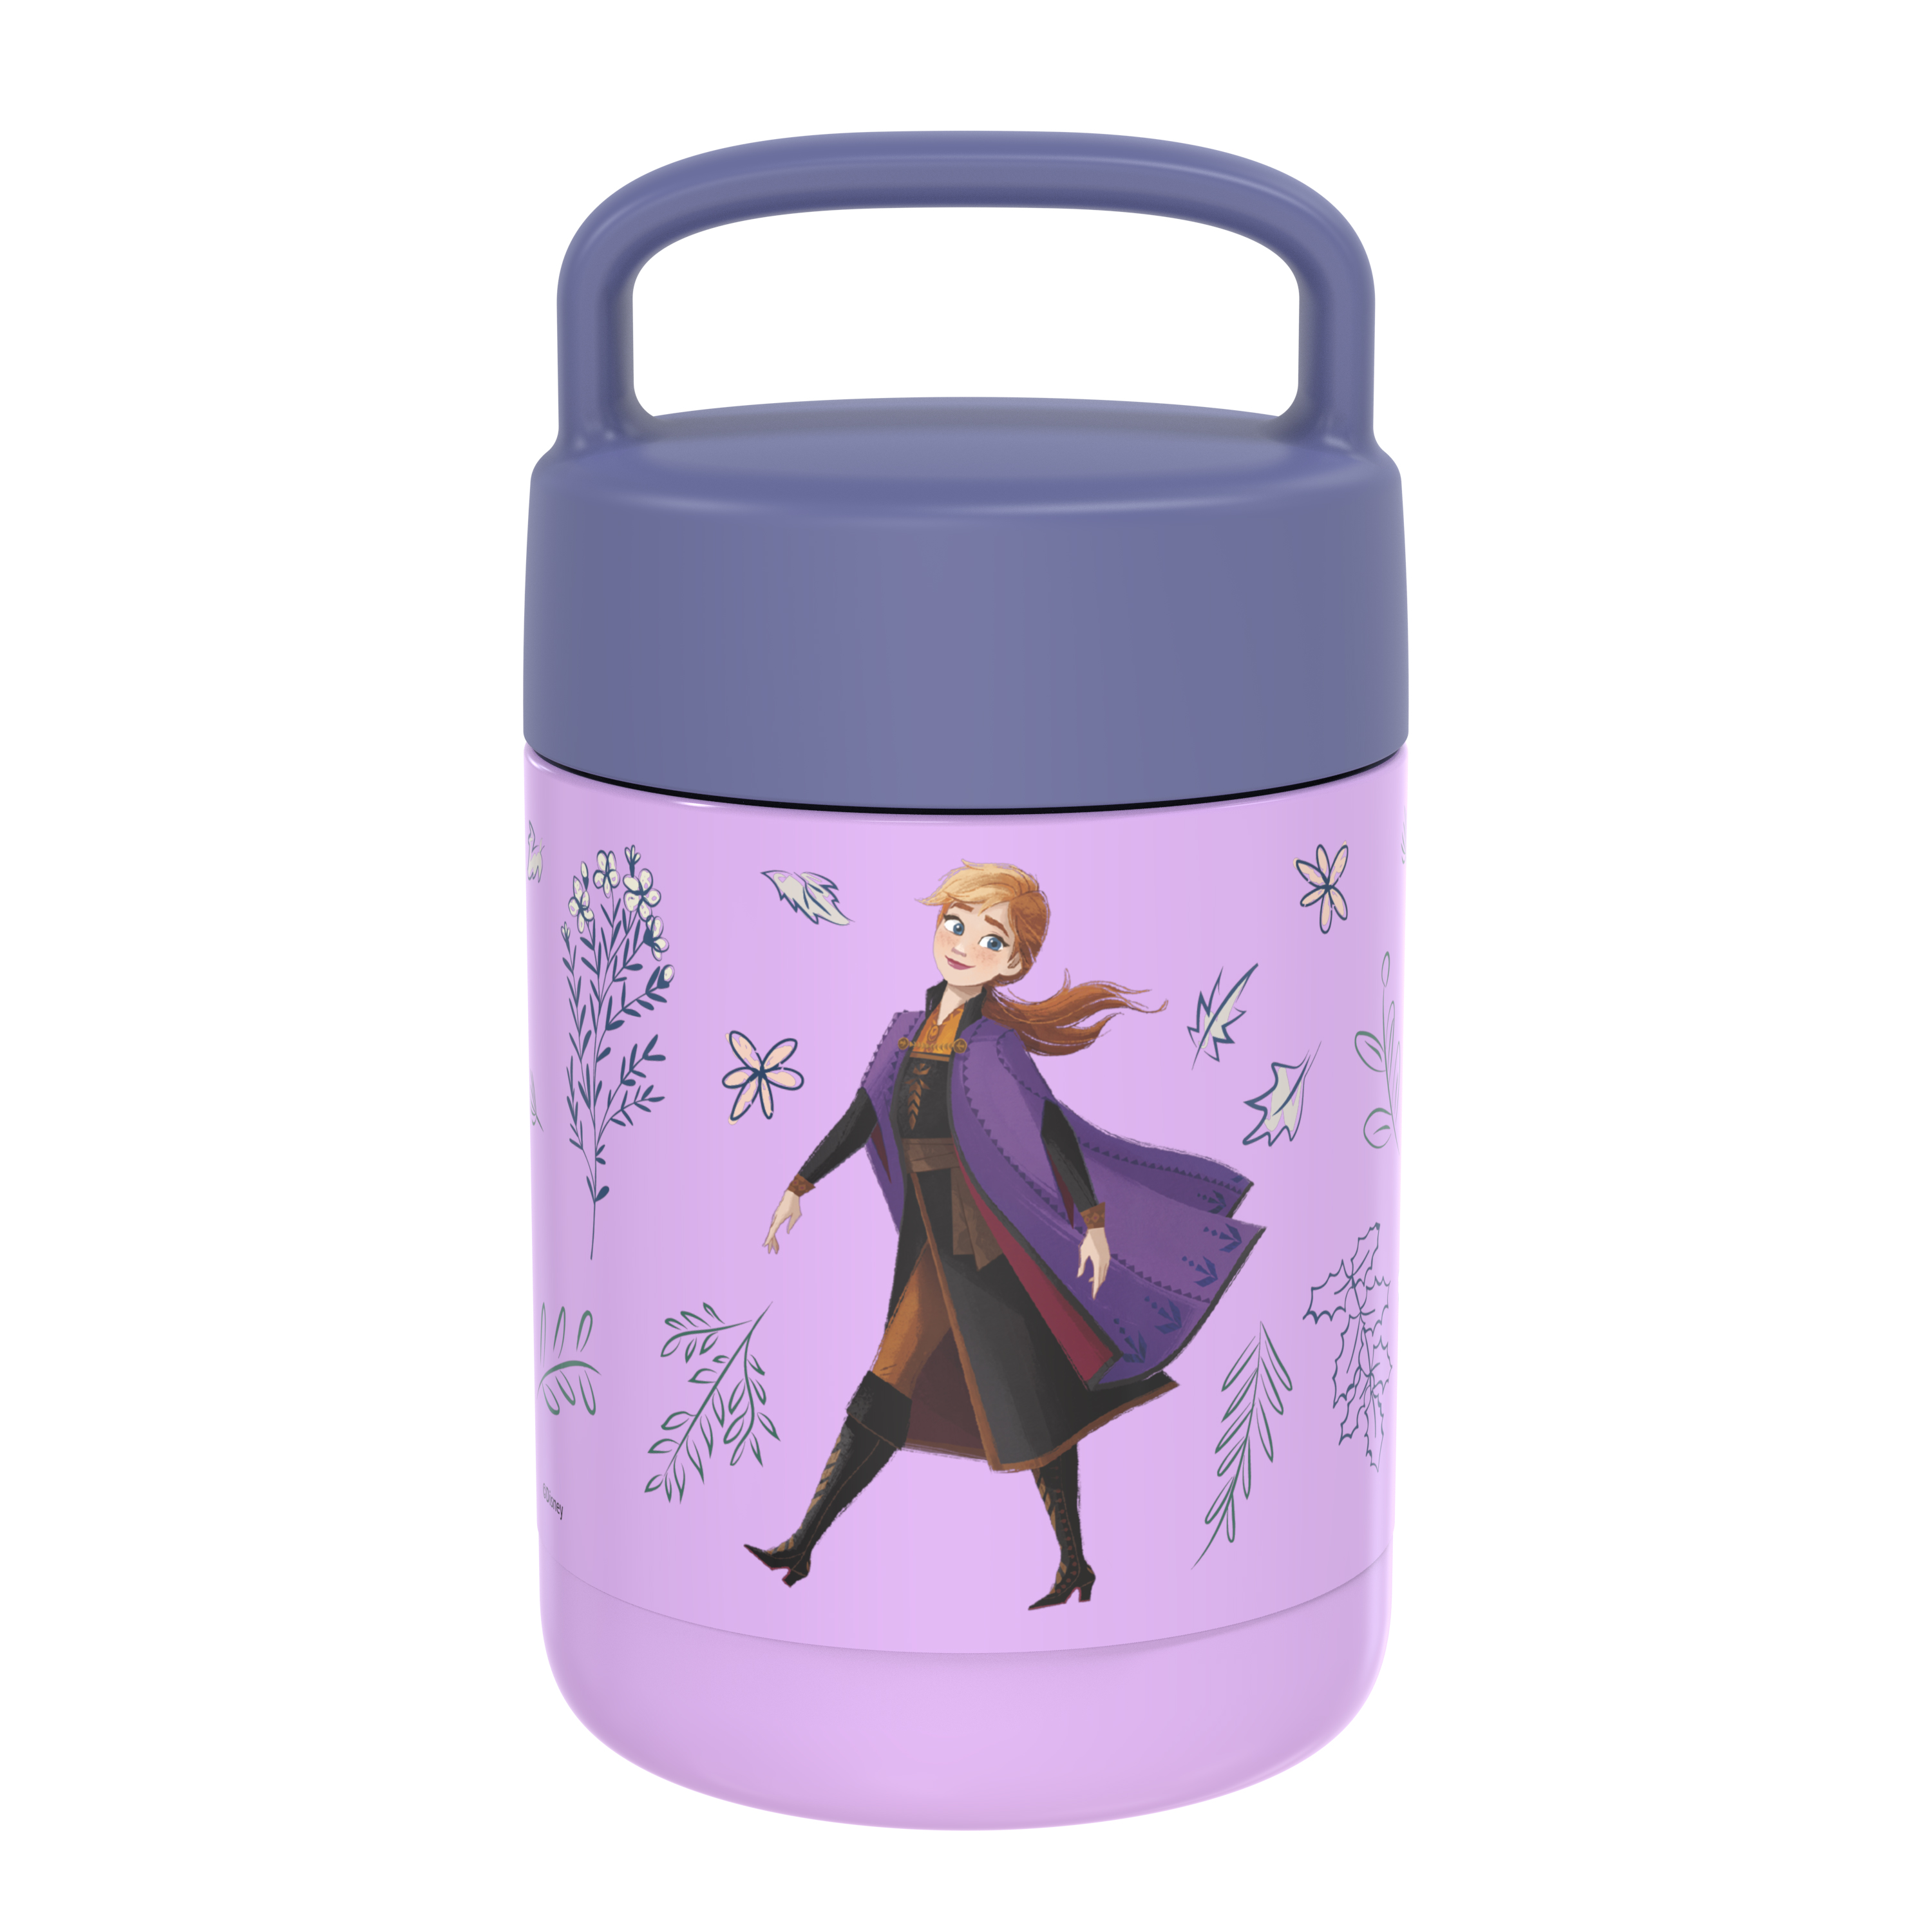 Disney Frozen 2 Movie Reusable Vacuum Insulated Stainless Steel Food Container, Princess Anna slideshow image 2